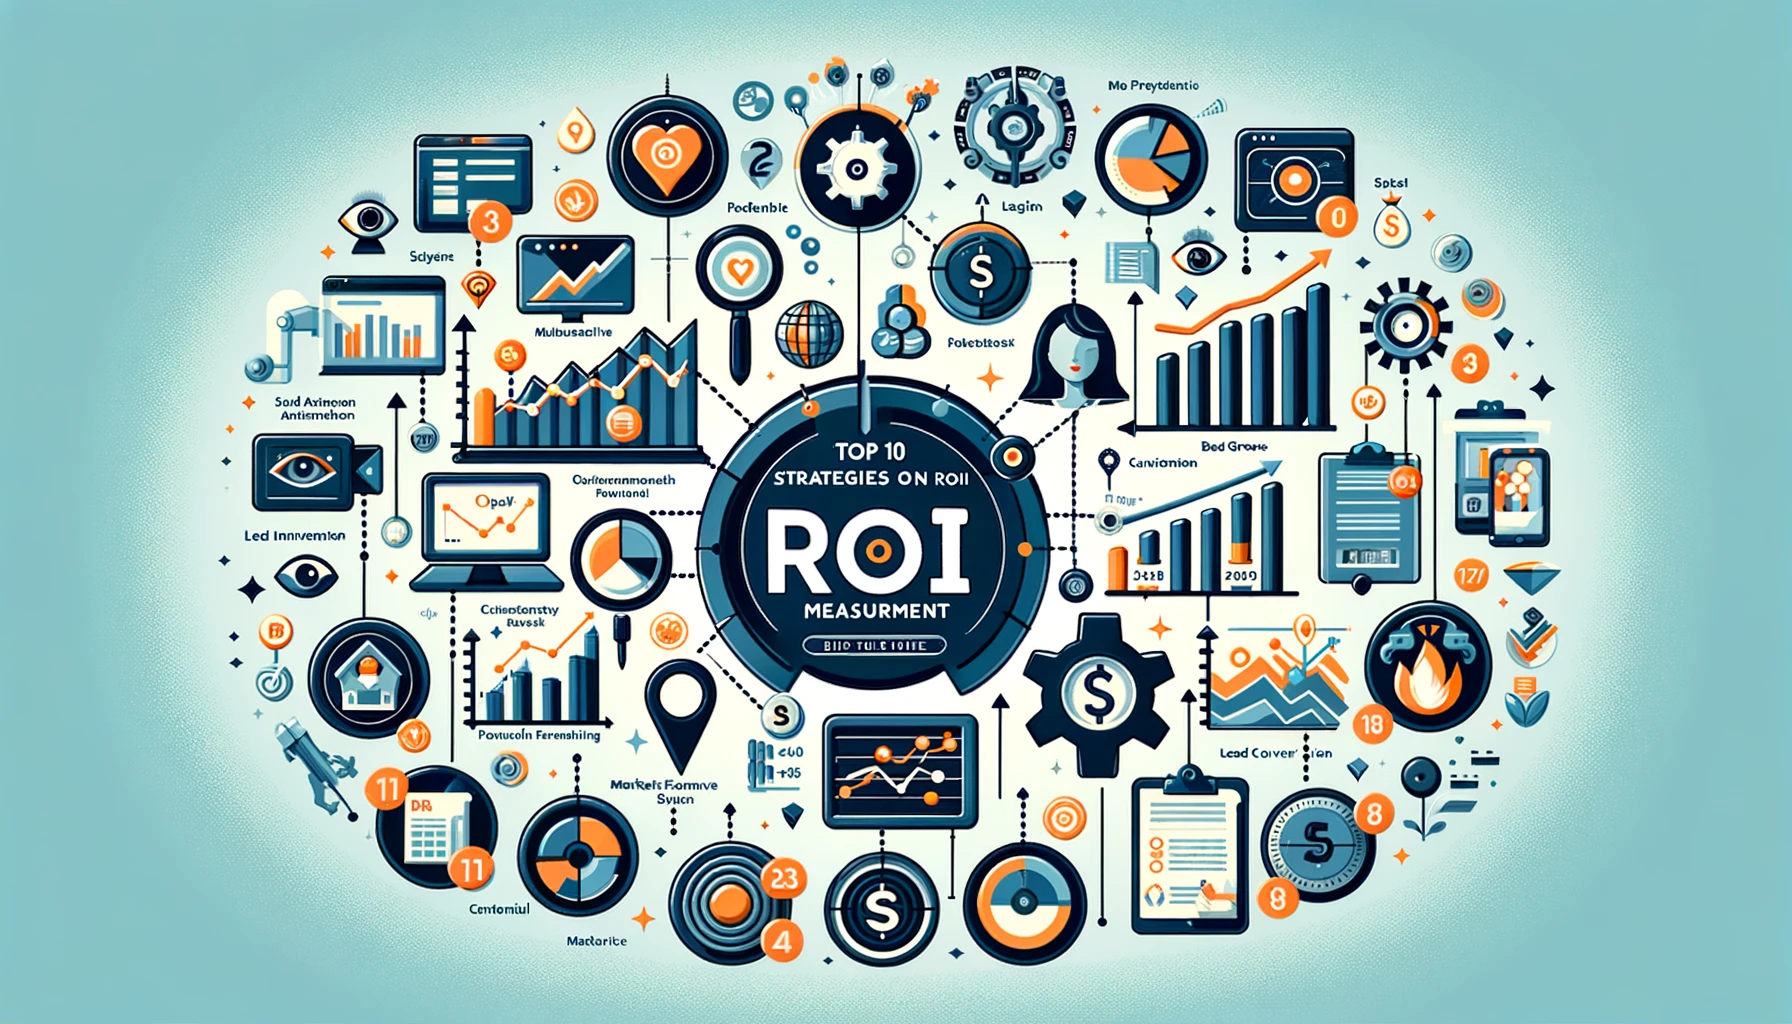 What are the top 10 strategies on ROI measurement that any B2B company should implement?